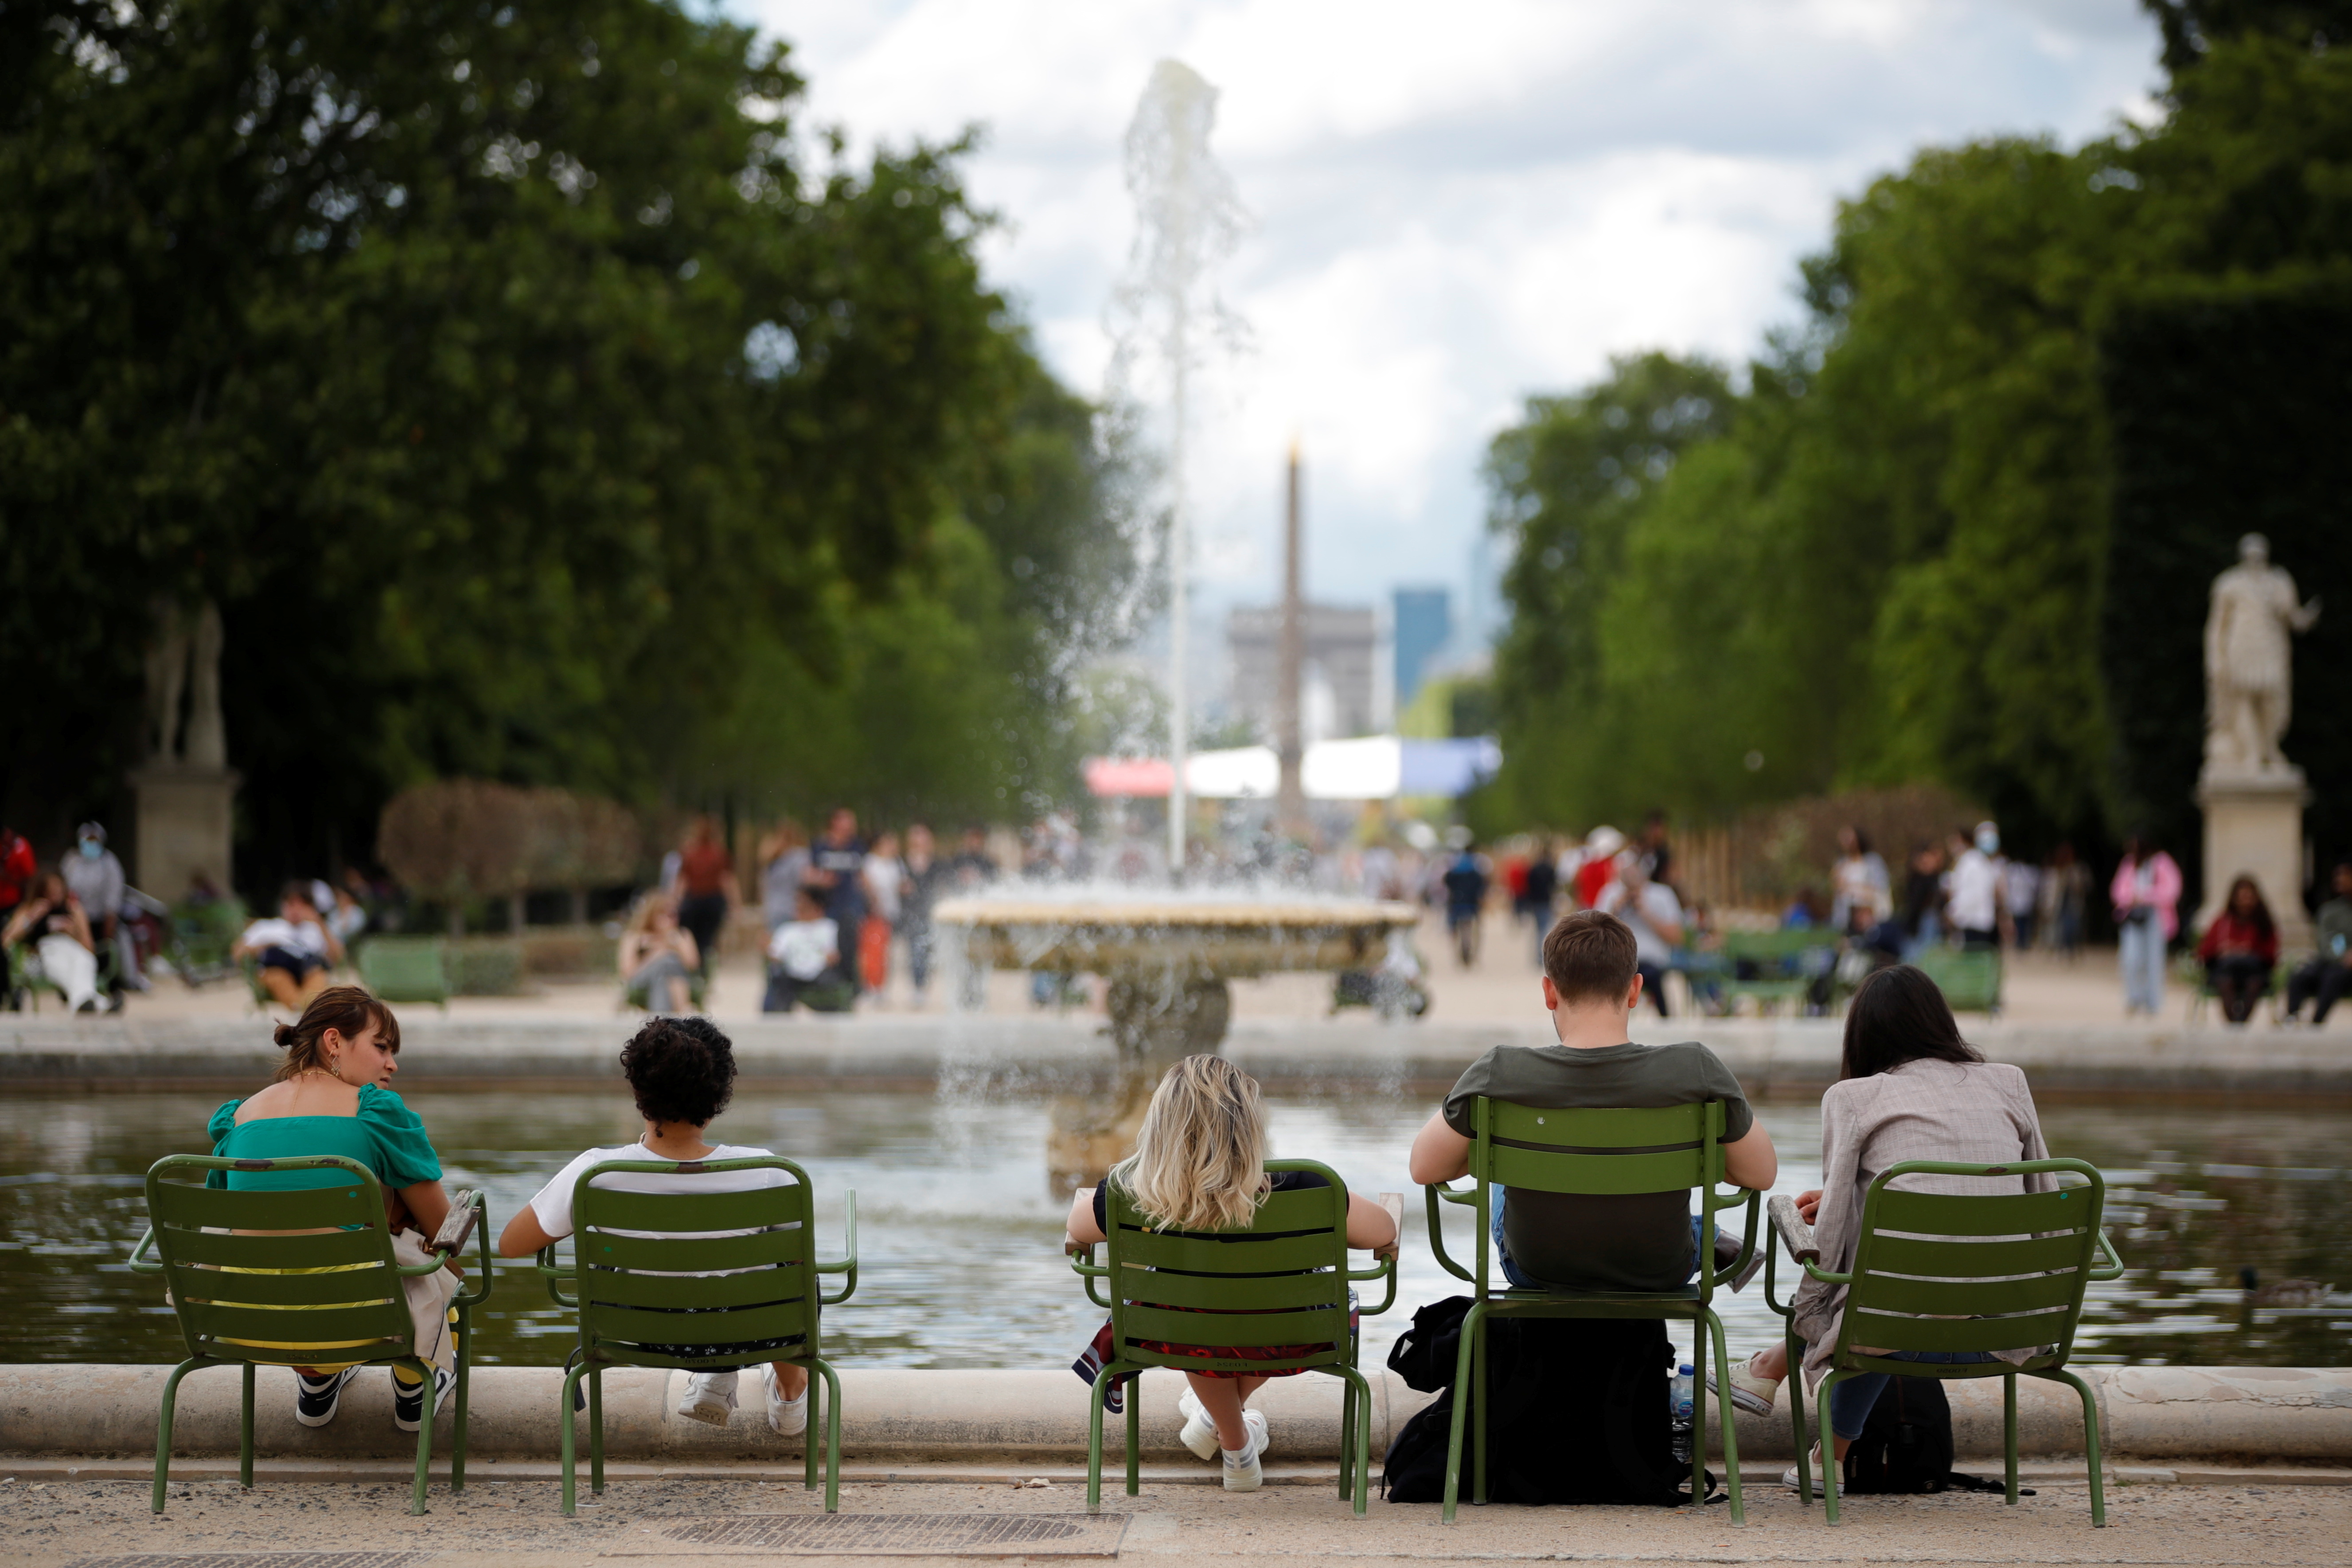 People relax in chairs around a fountain in the Tuileries Garden in Paris